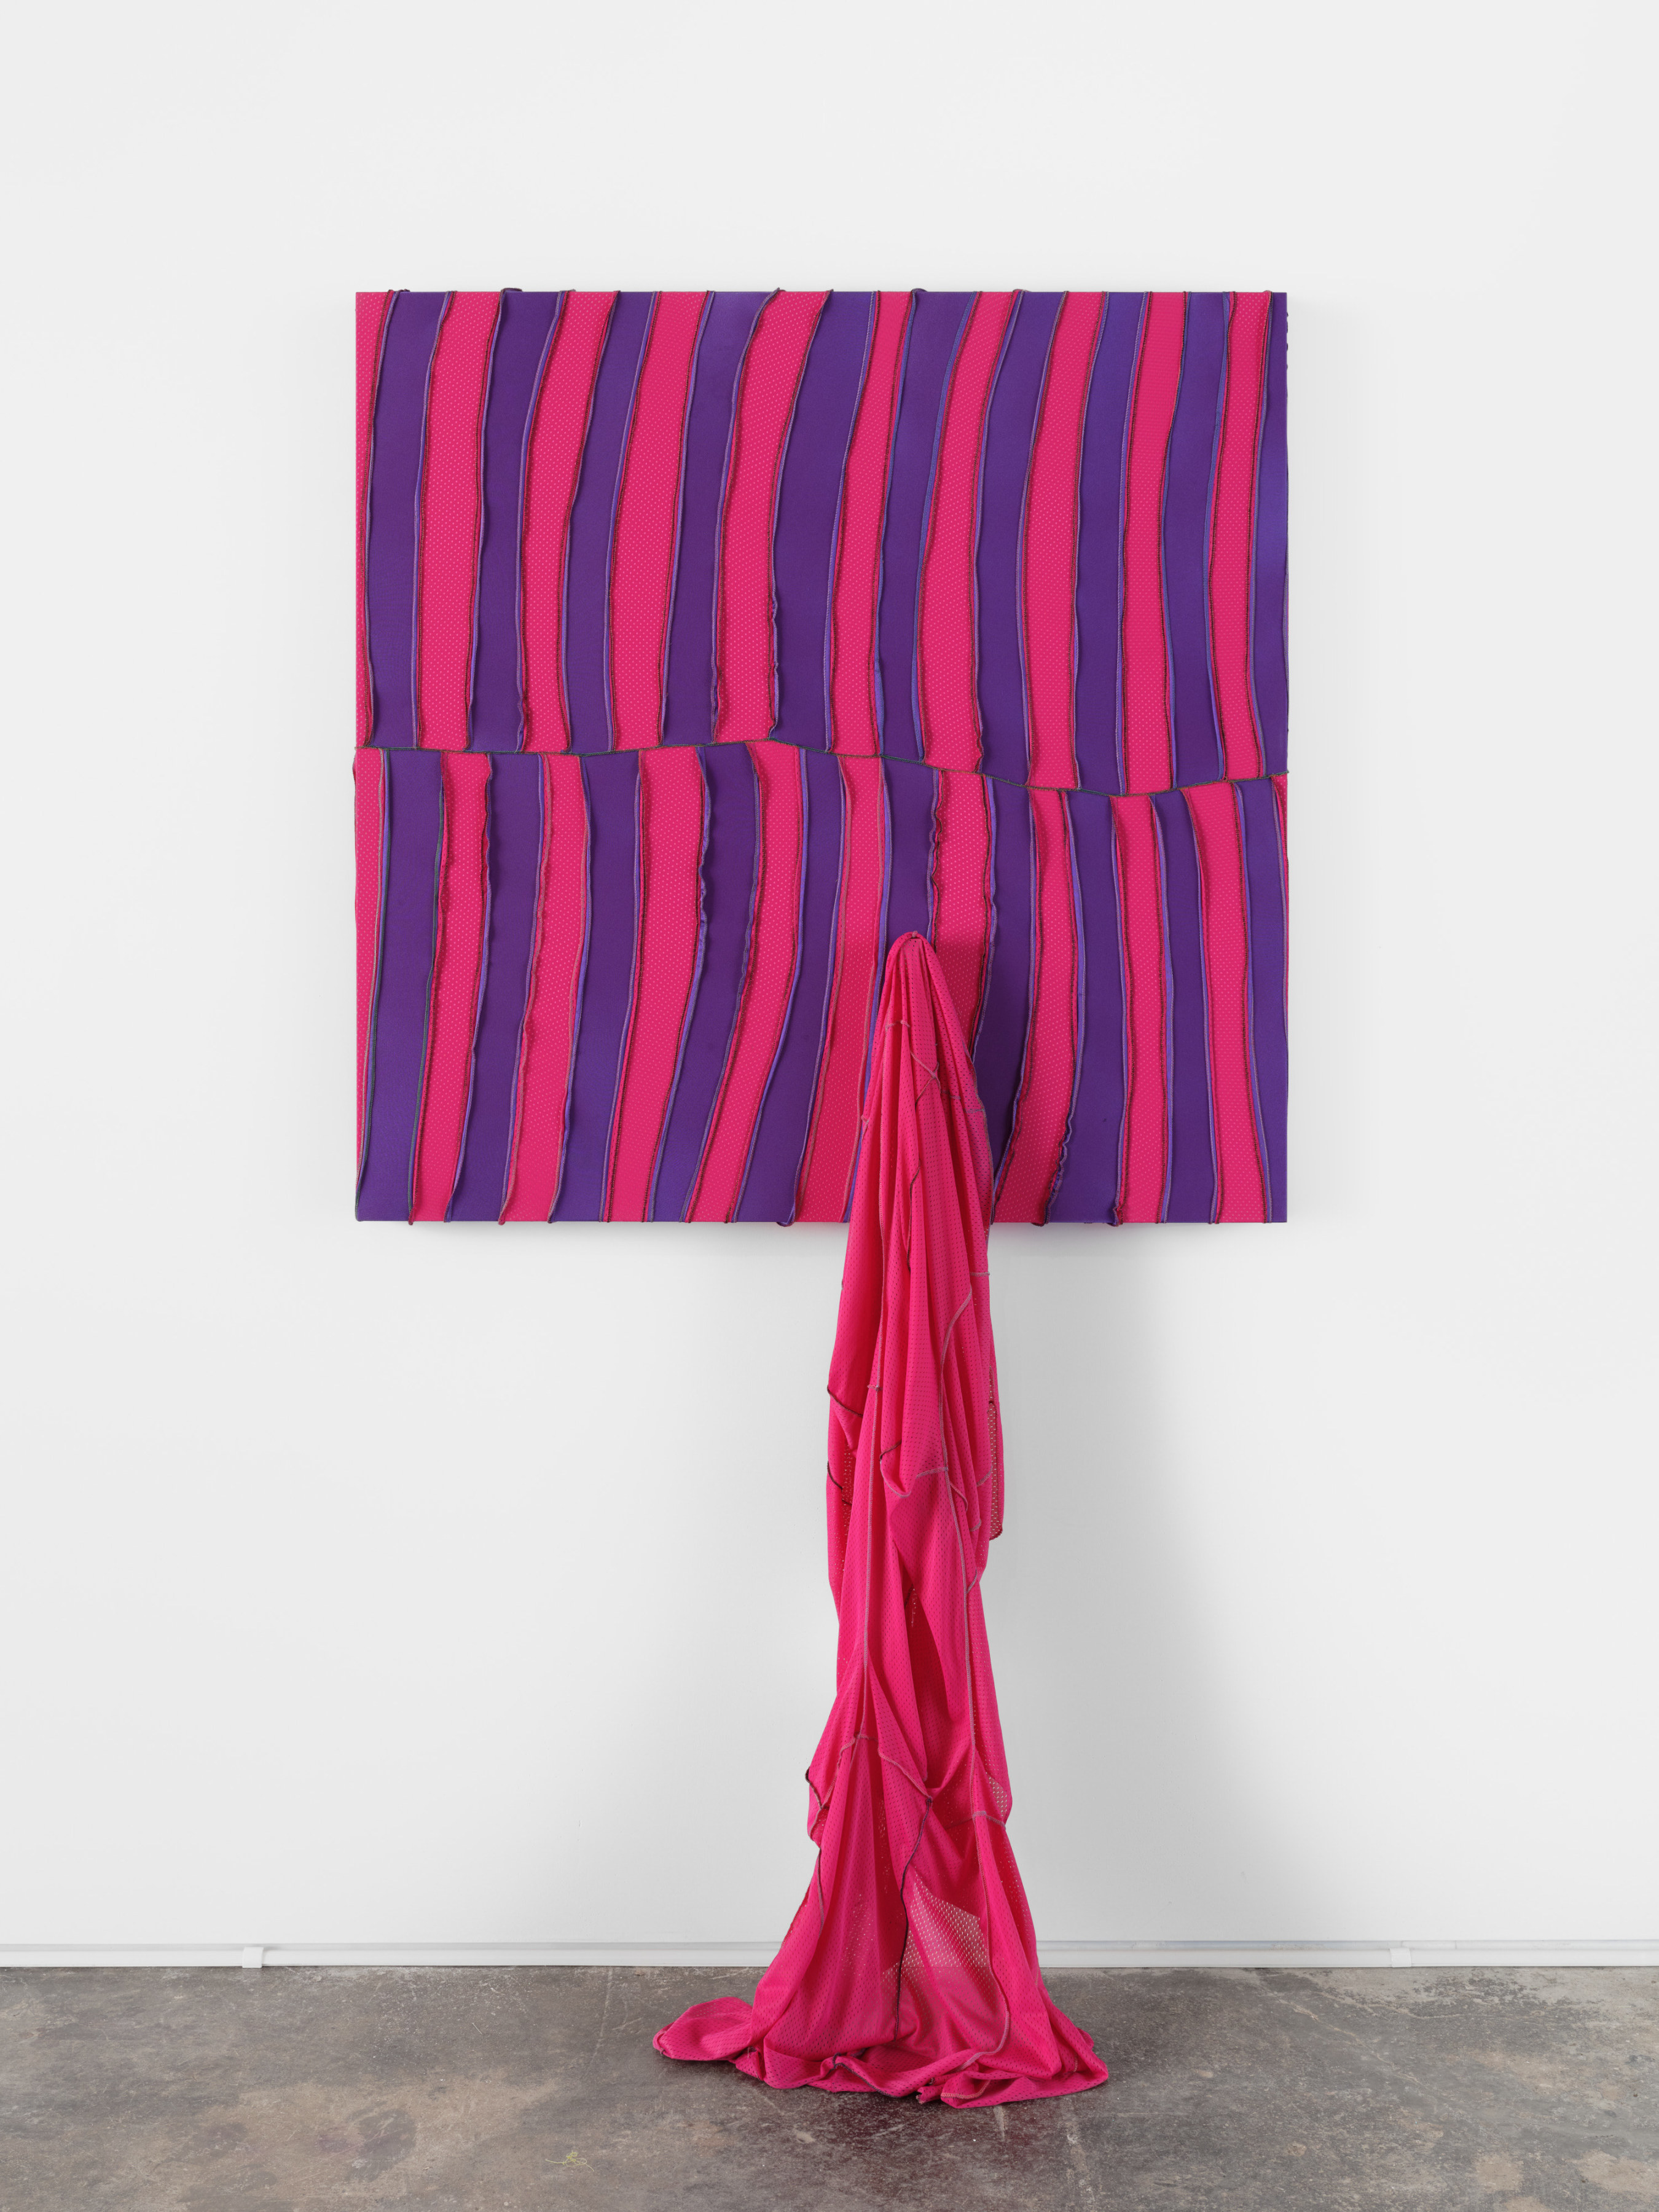 Anthony Olubunmi Akinbola artwork titled "Guess This Flavor". Pink and purple durags sewn together with a loose pink swath cascading down to the floor. 88 x 48 x 7 1/2 in (223.5 x 121.9 x 19 cm), durags on aluminum and wood frame, 2023.